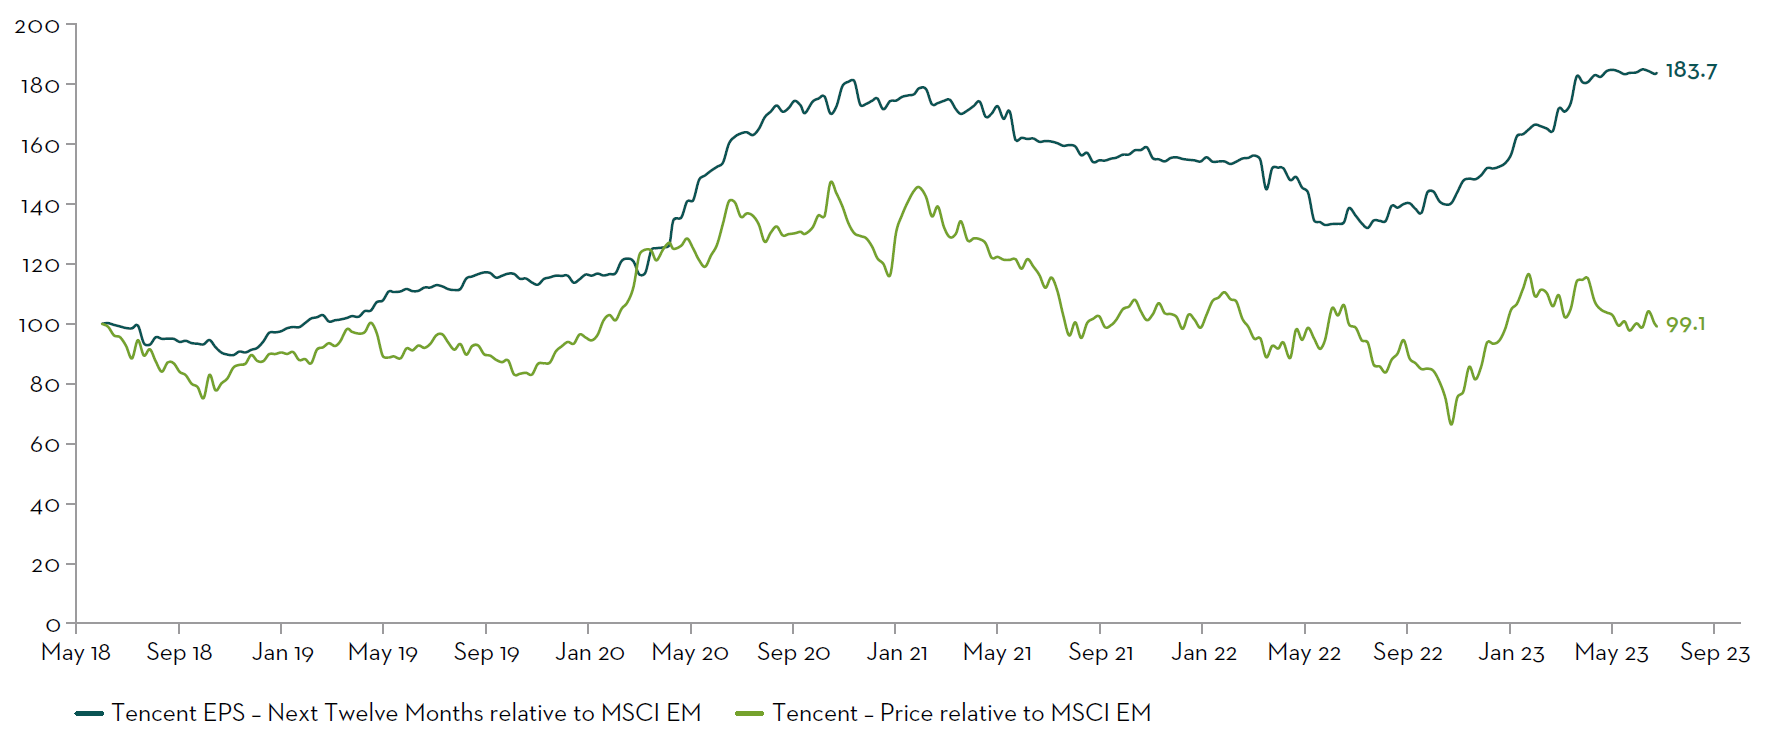 Tencent Performance Relative to MSCI Emerging Markets Index